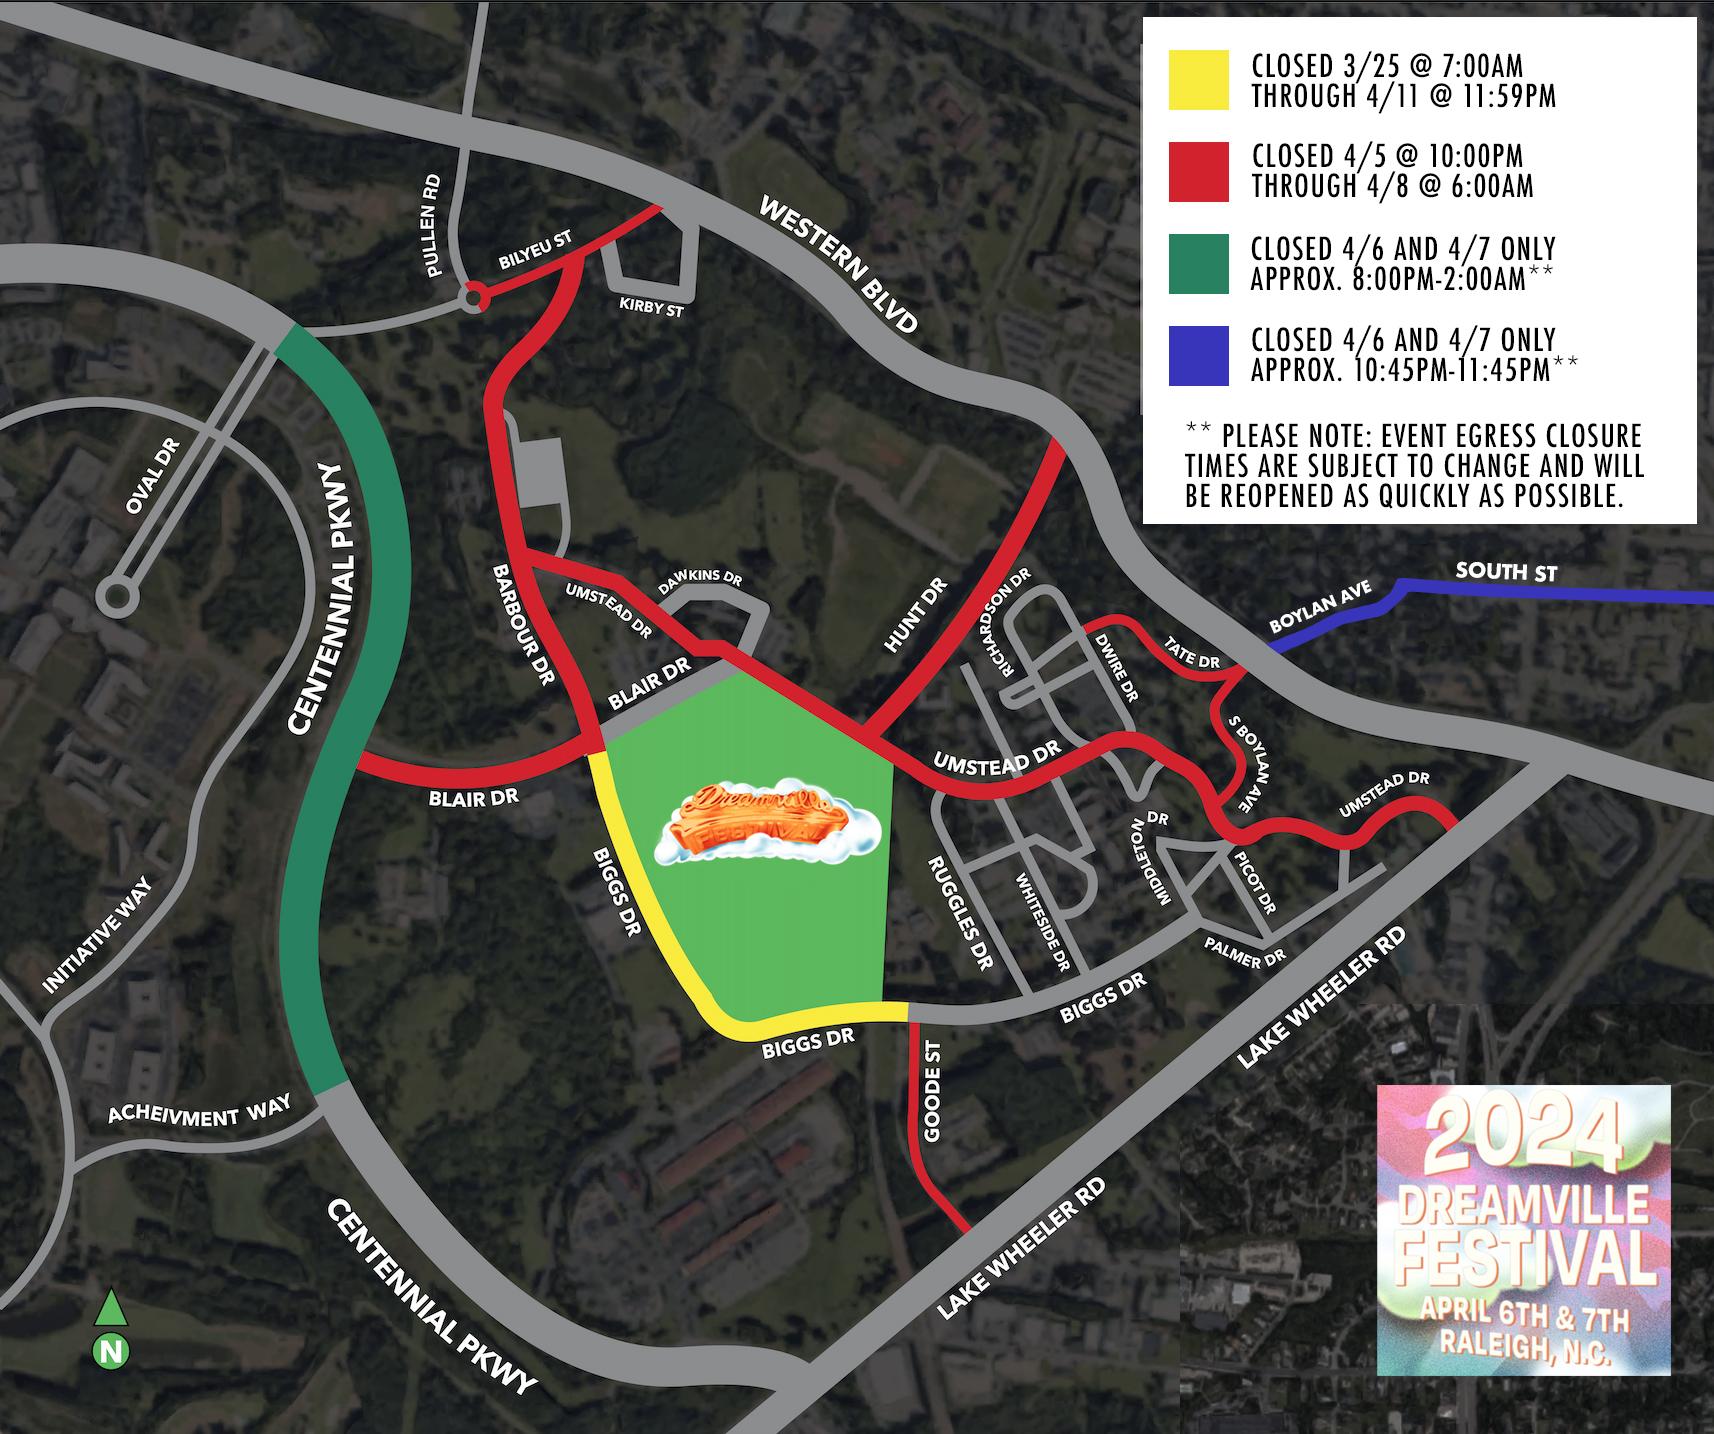 Dreamville Festival 2024 Road Closure Map and Schedule